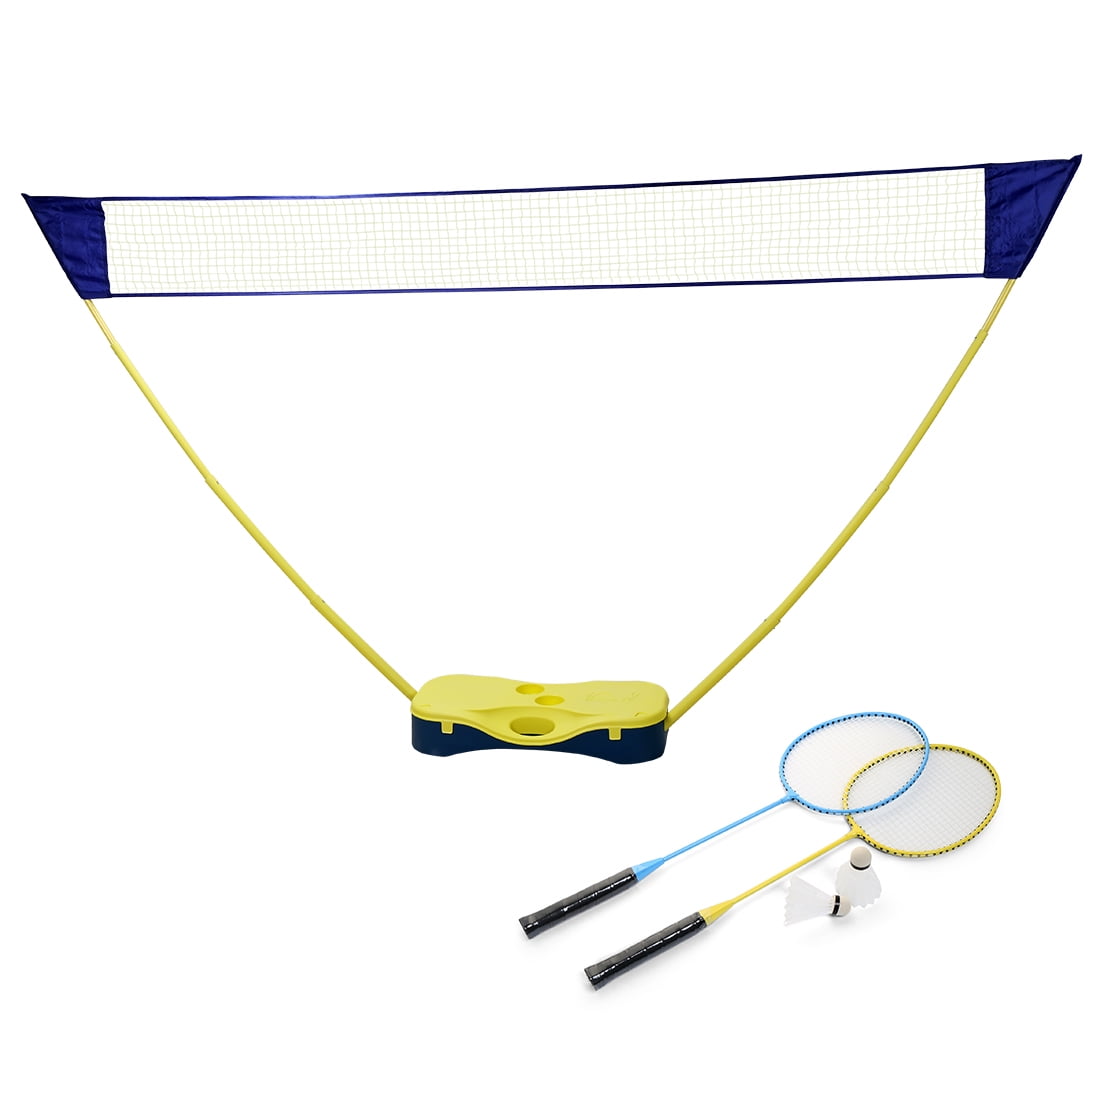 Physical Education Motion with Badminton Racket 3 in 1 Outdoor Tennis Badminton Volleyball Net PLKO Portable Folding Badminton Set 